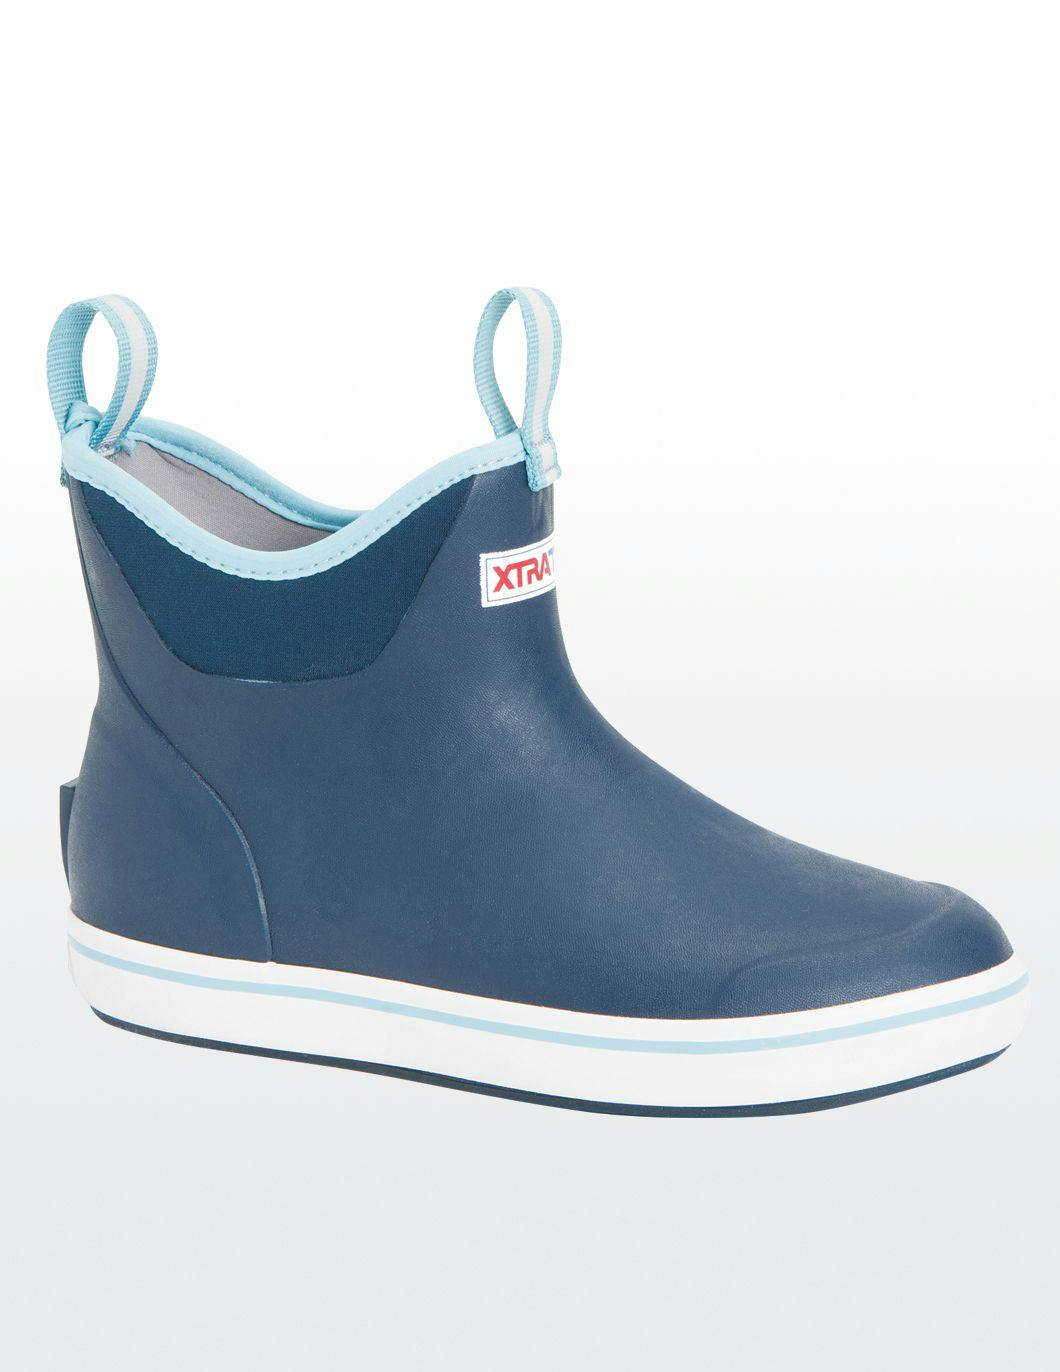 xtratuf-womens-navy-ankle-boot